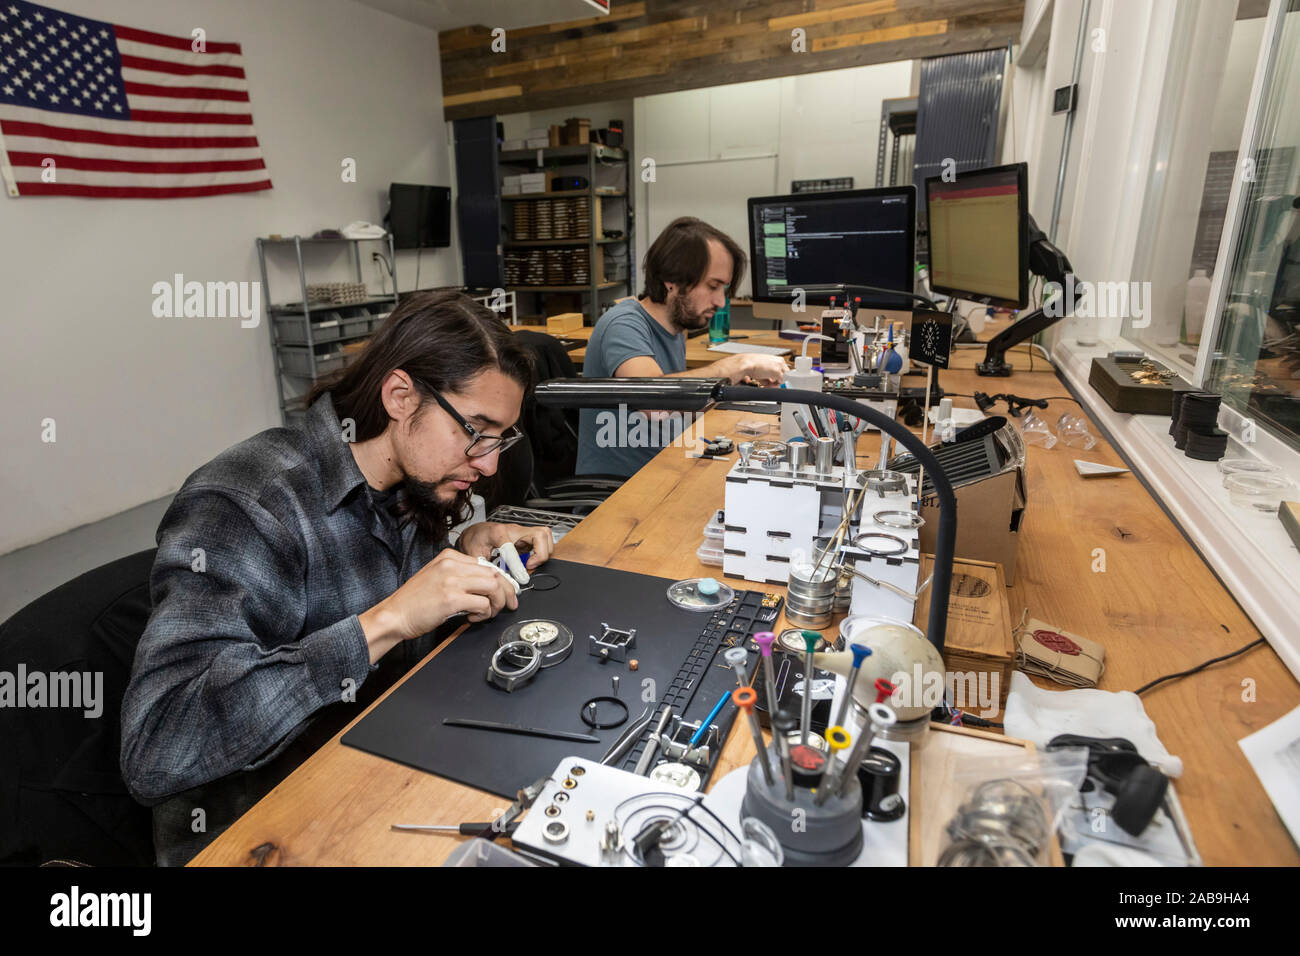 Fort Collins - Workers build watches at the Vortic Watch Company. The company salvages and restores antique pocket watches, making them into expensive Stock Photo